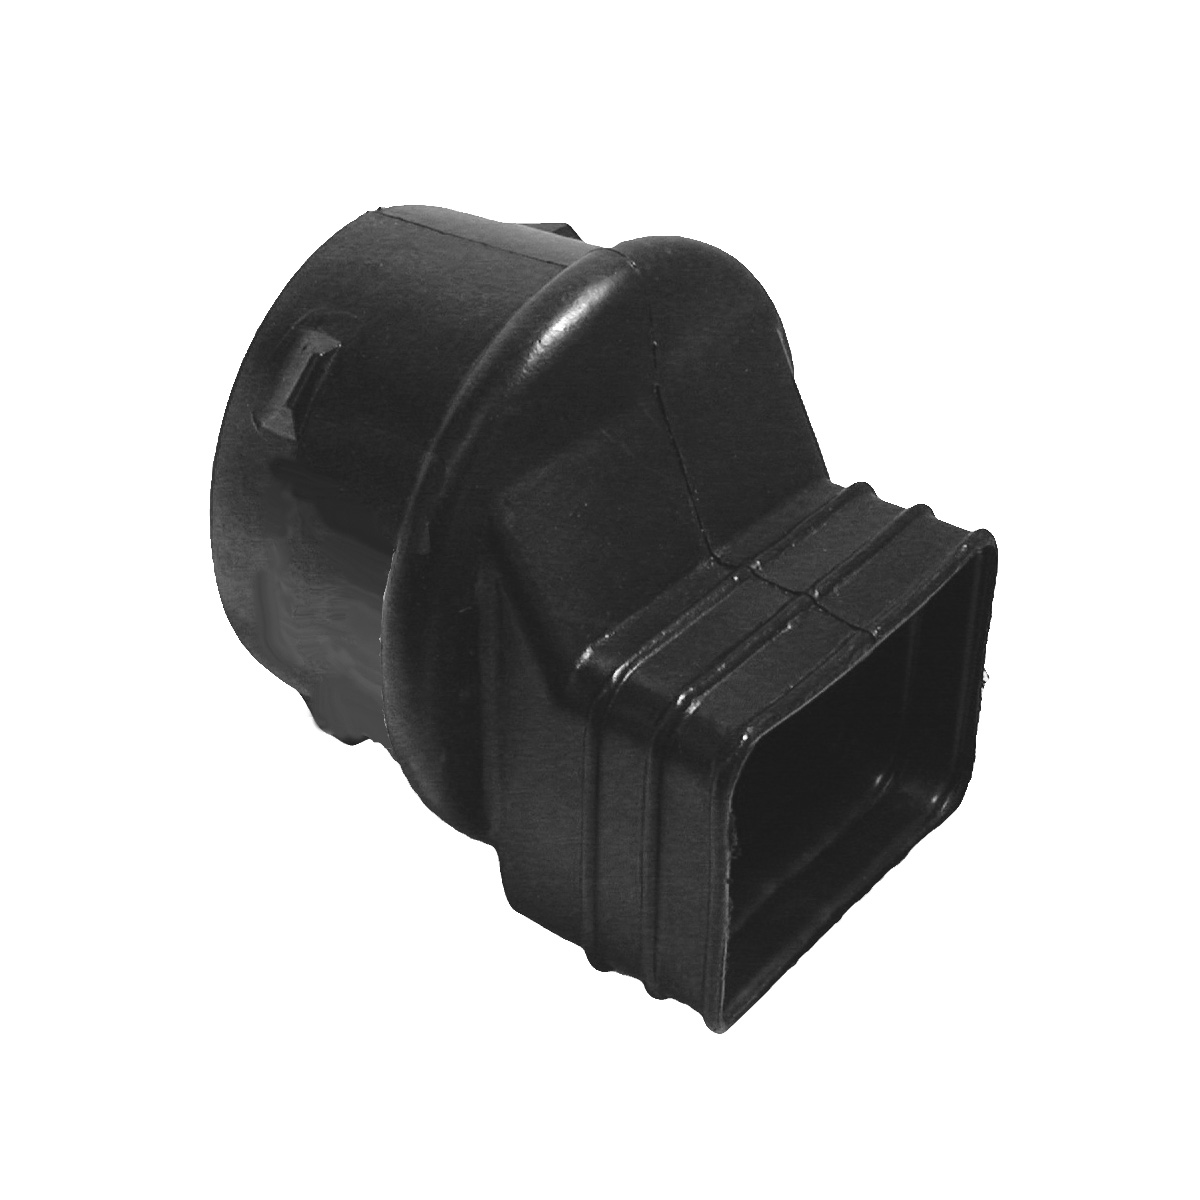 4″ Ads Downspout Adapter Black